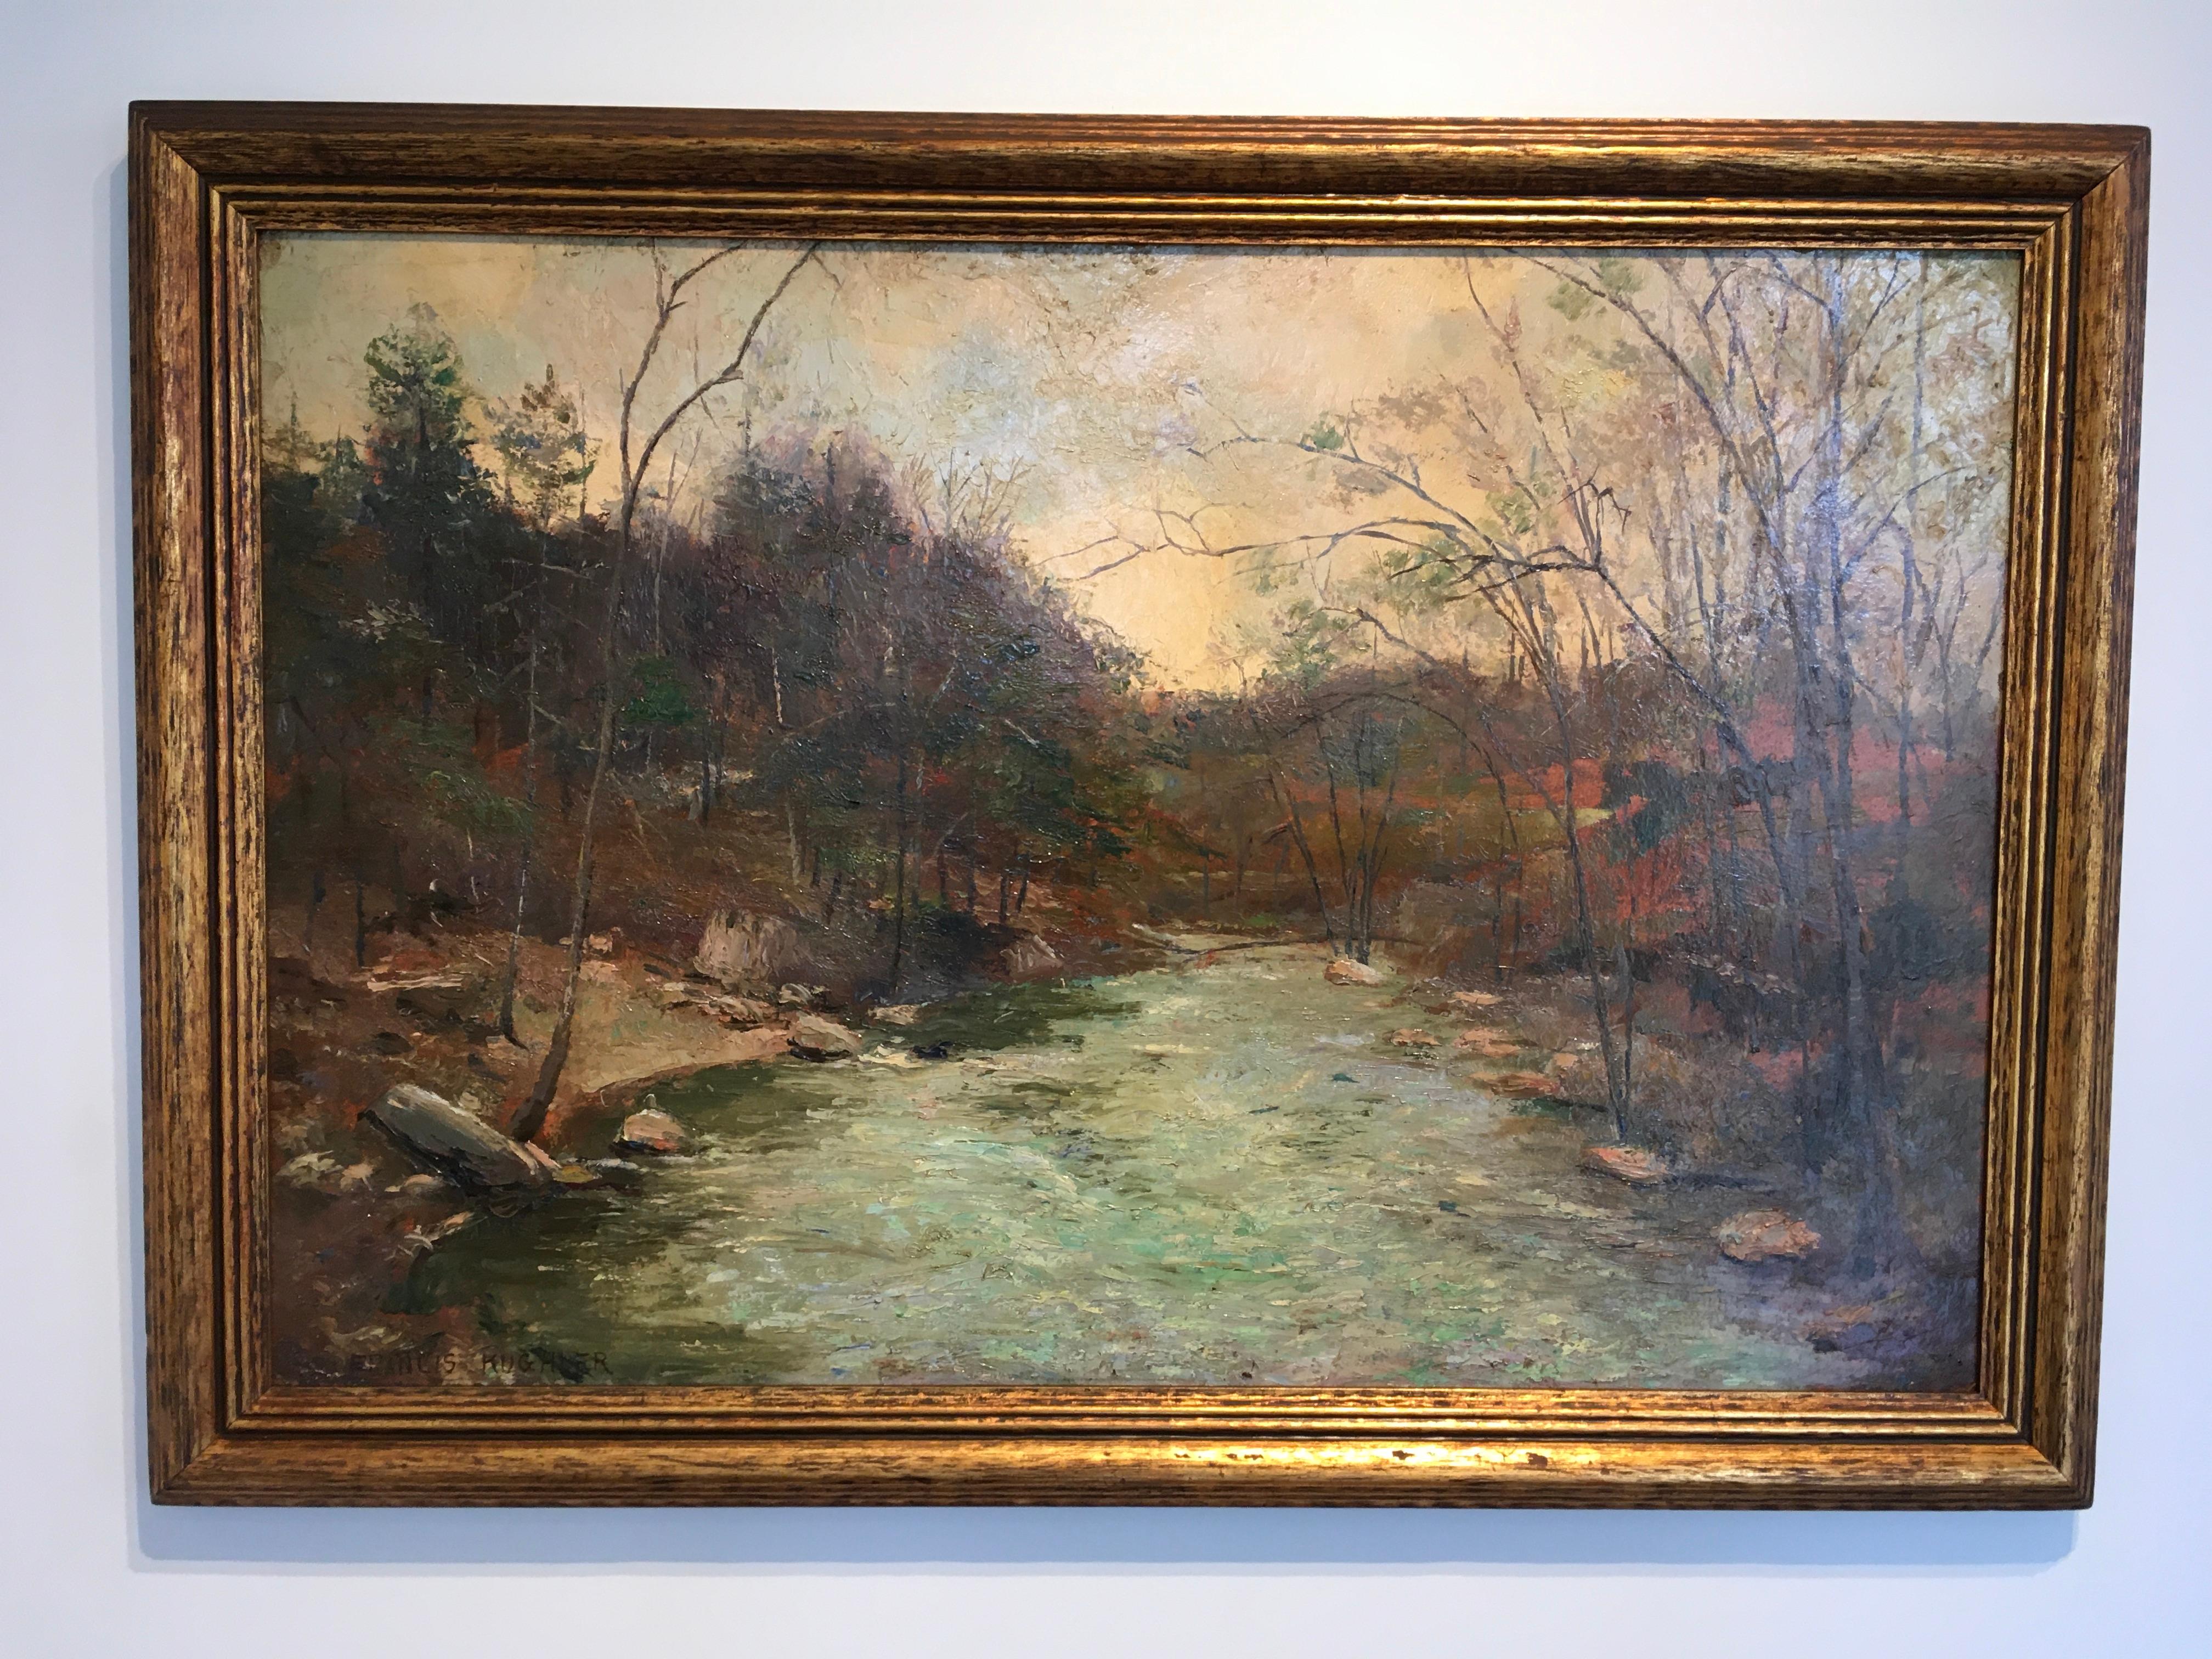 This Mid-century Oil on Panel Landscape by Francis Kughler measures 28 1/2" x 40 x 1 1/2", and features a gold-colored wood frame. A hilly landscape of trees rendered in fall colors flanks the rocky bands of a shallow blue stream that disappears